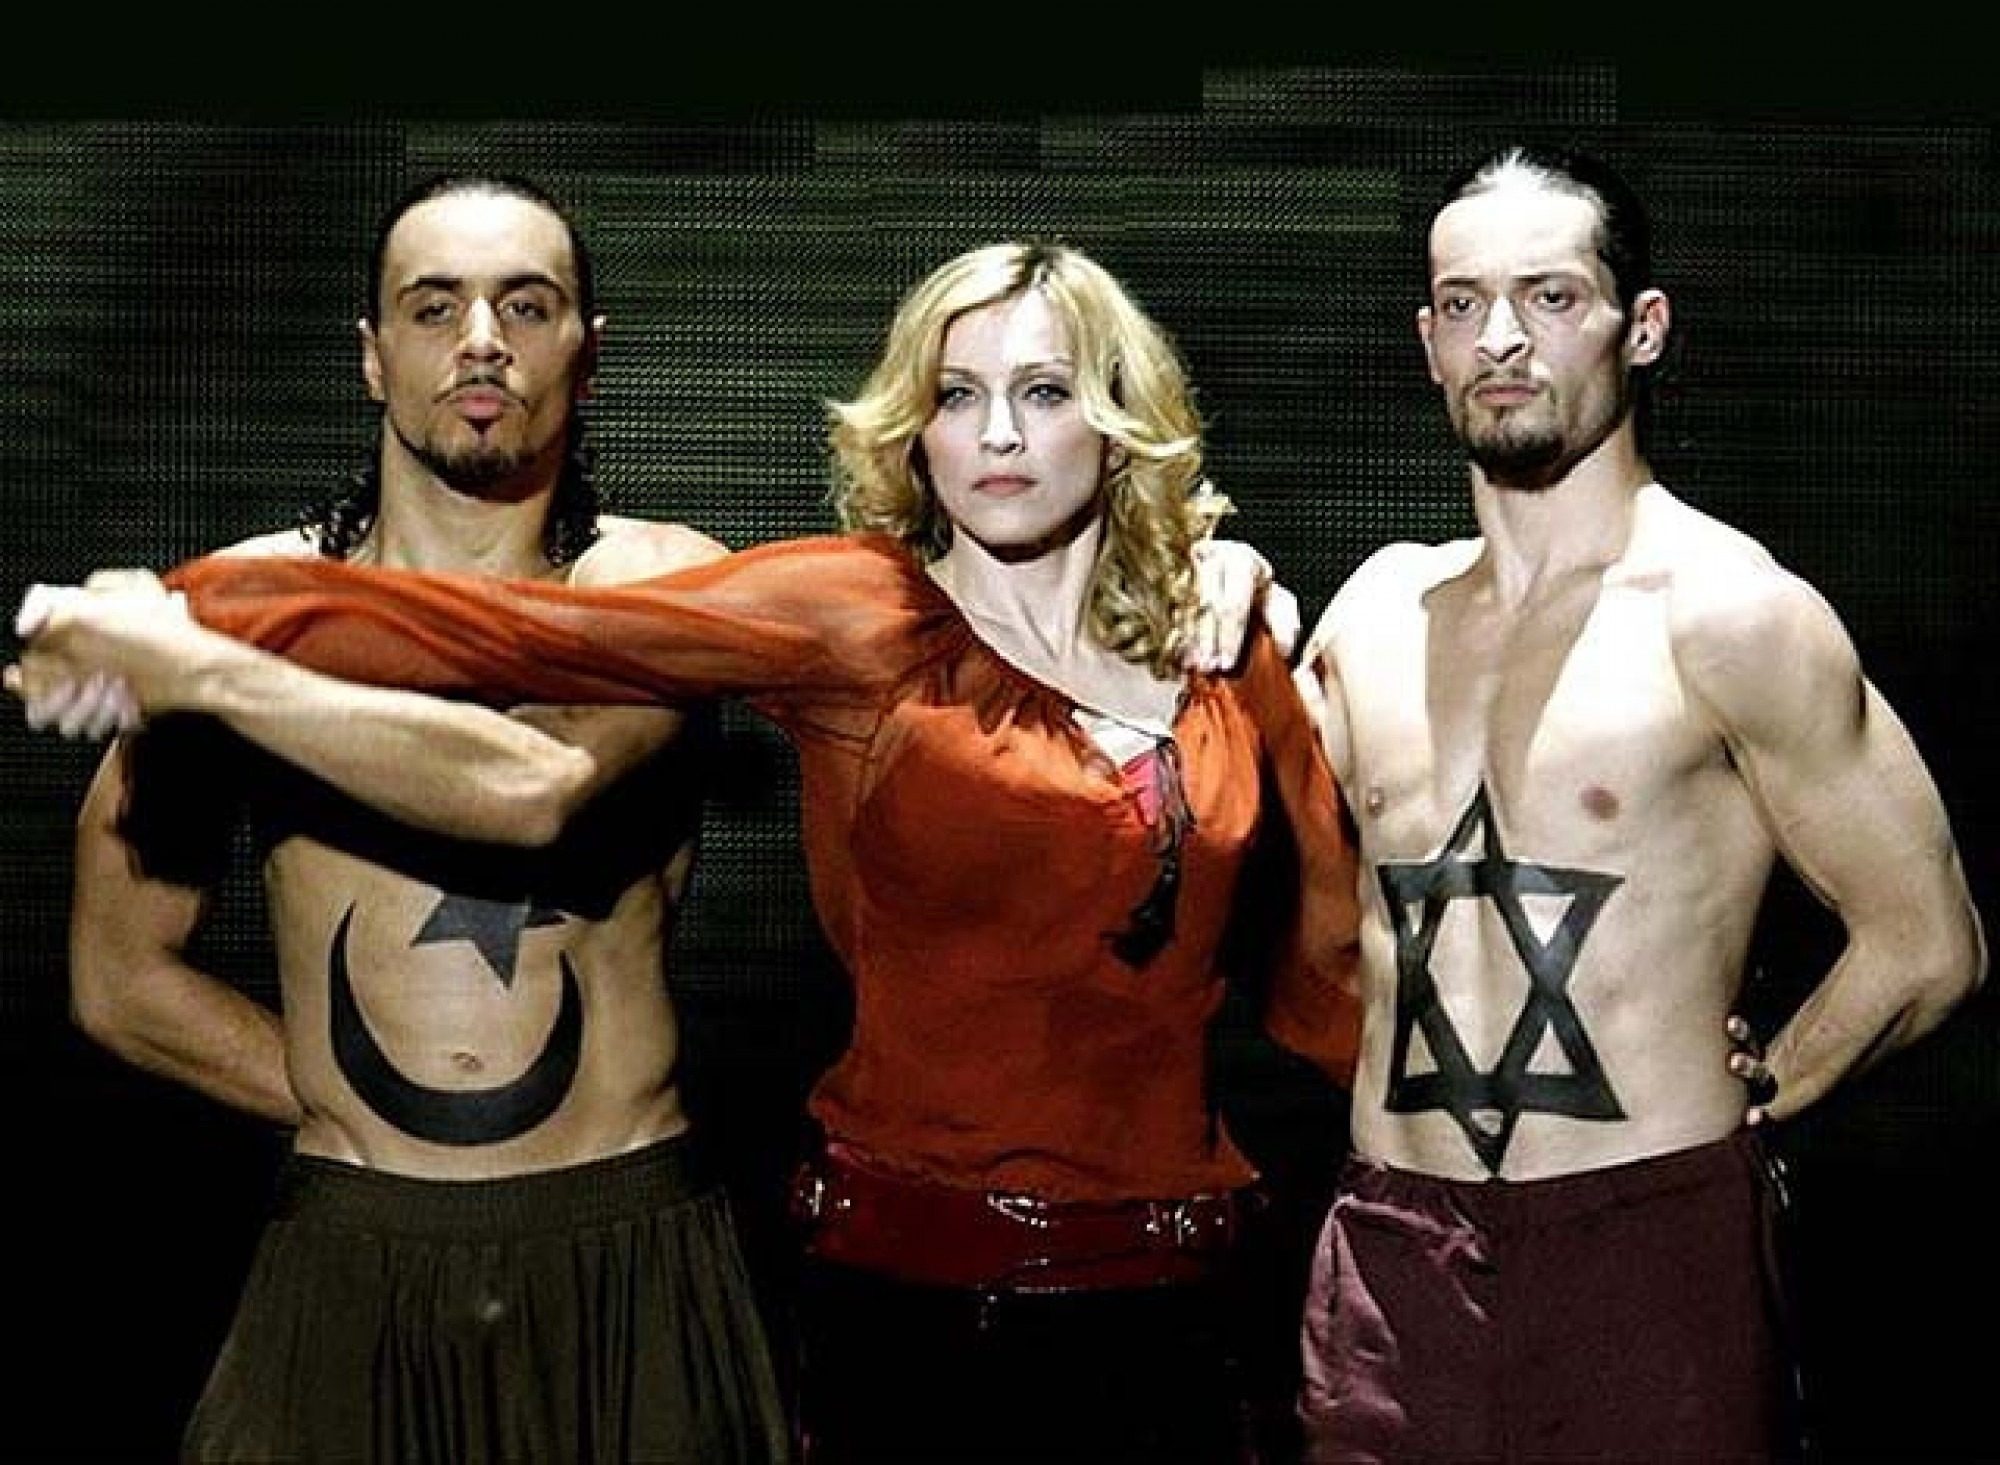 03022019_034317_madonna-with-jew-and-arab_grande-1